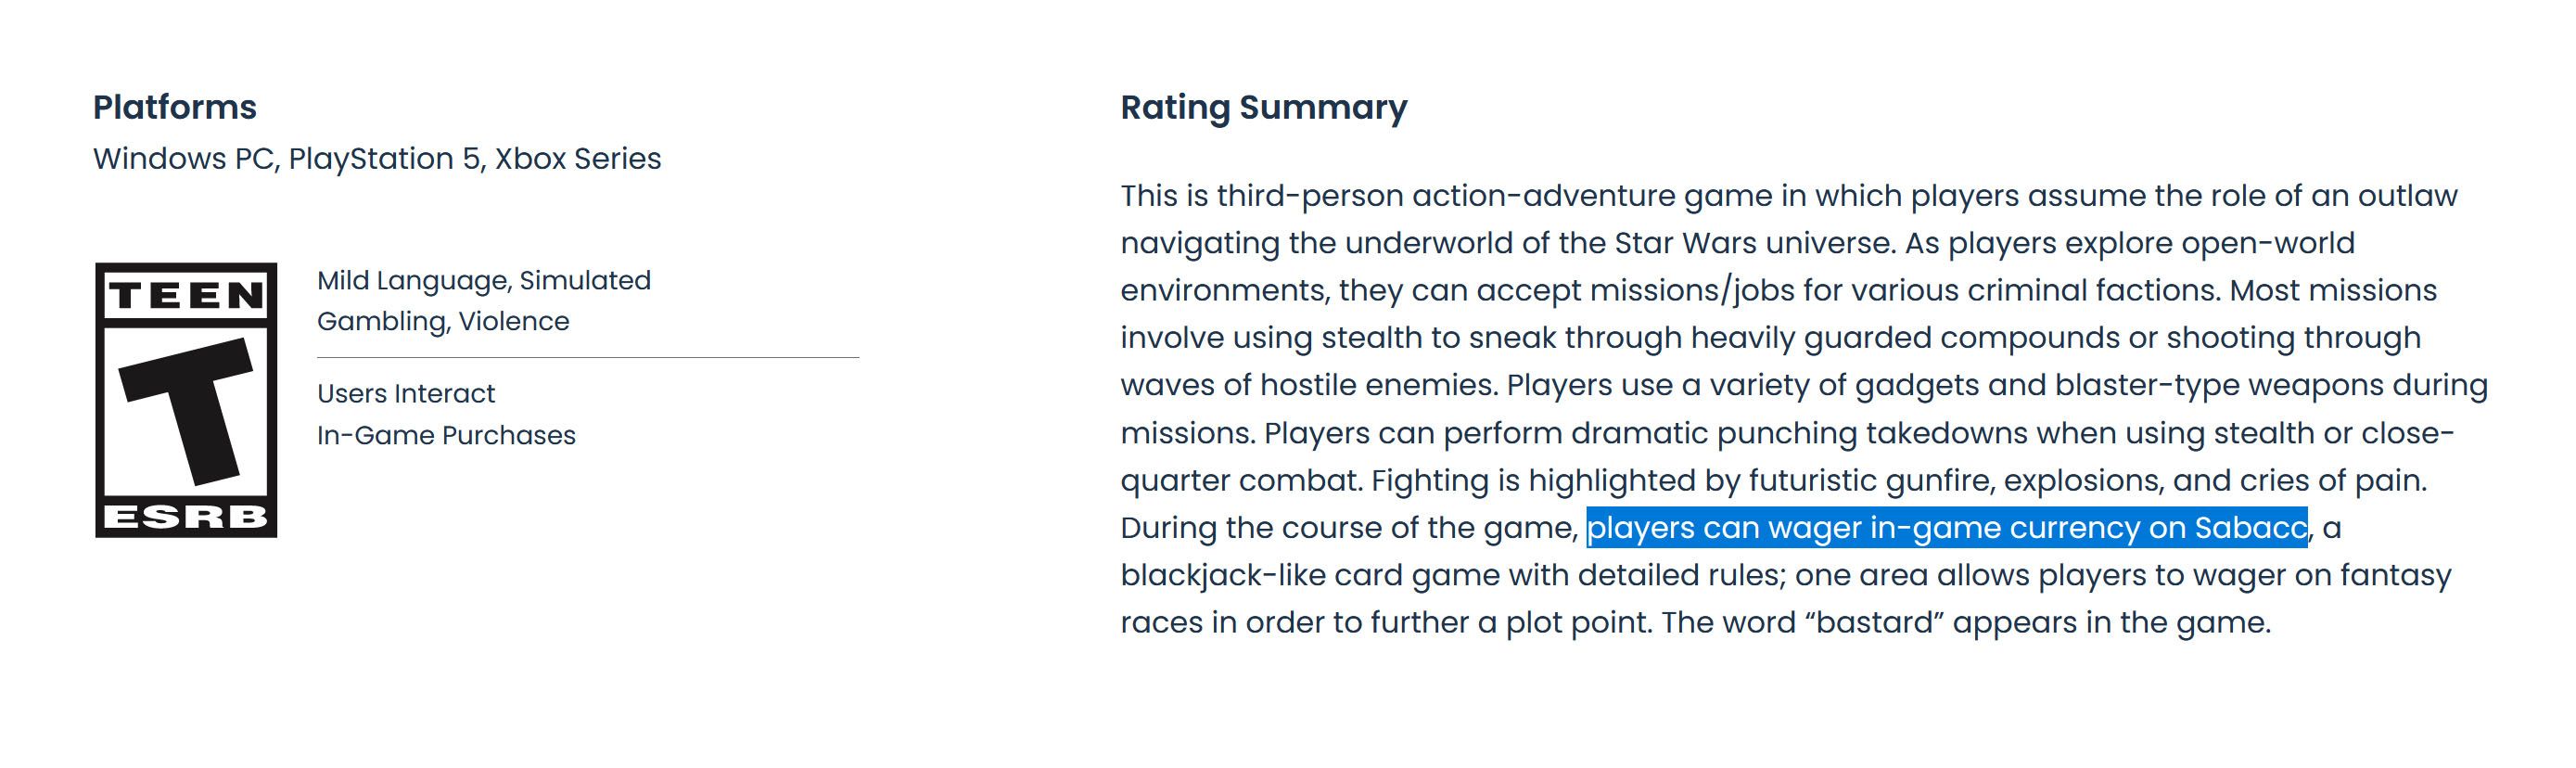 A screenshot of the ESRB's content description for Star Wars Outlaws that mentions the card game Sabacc.